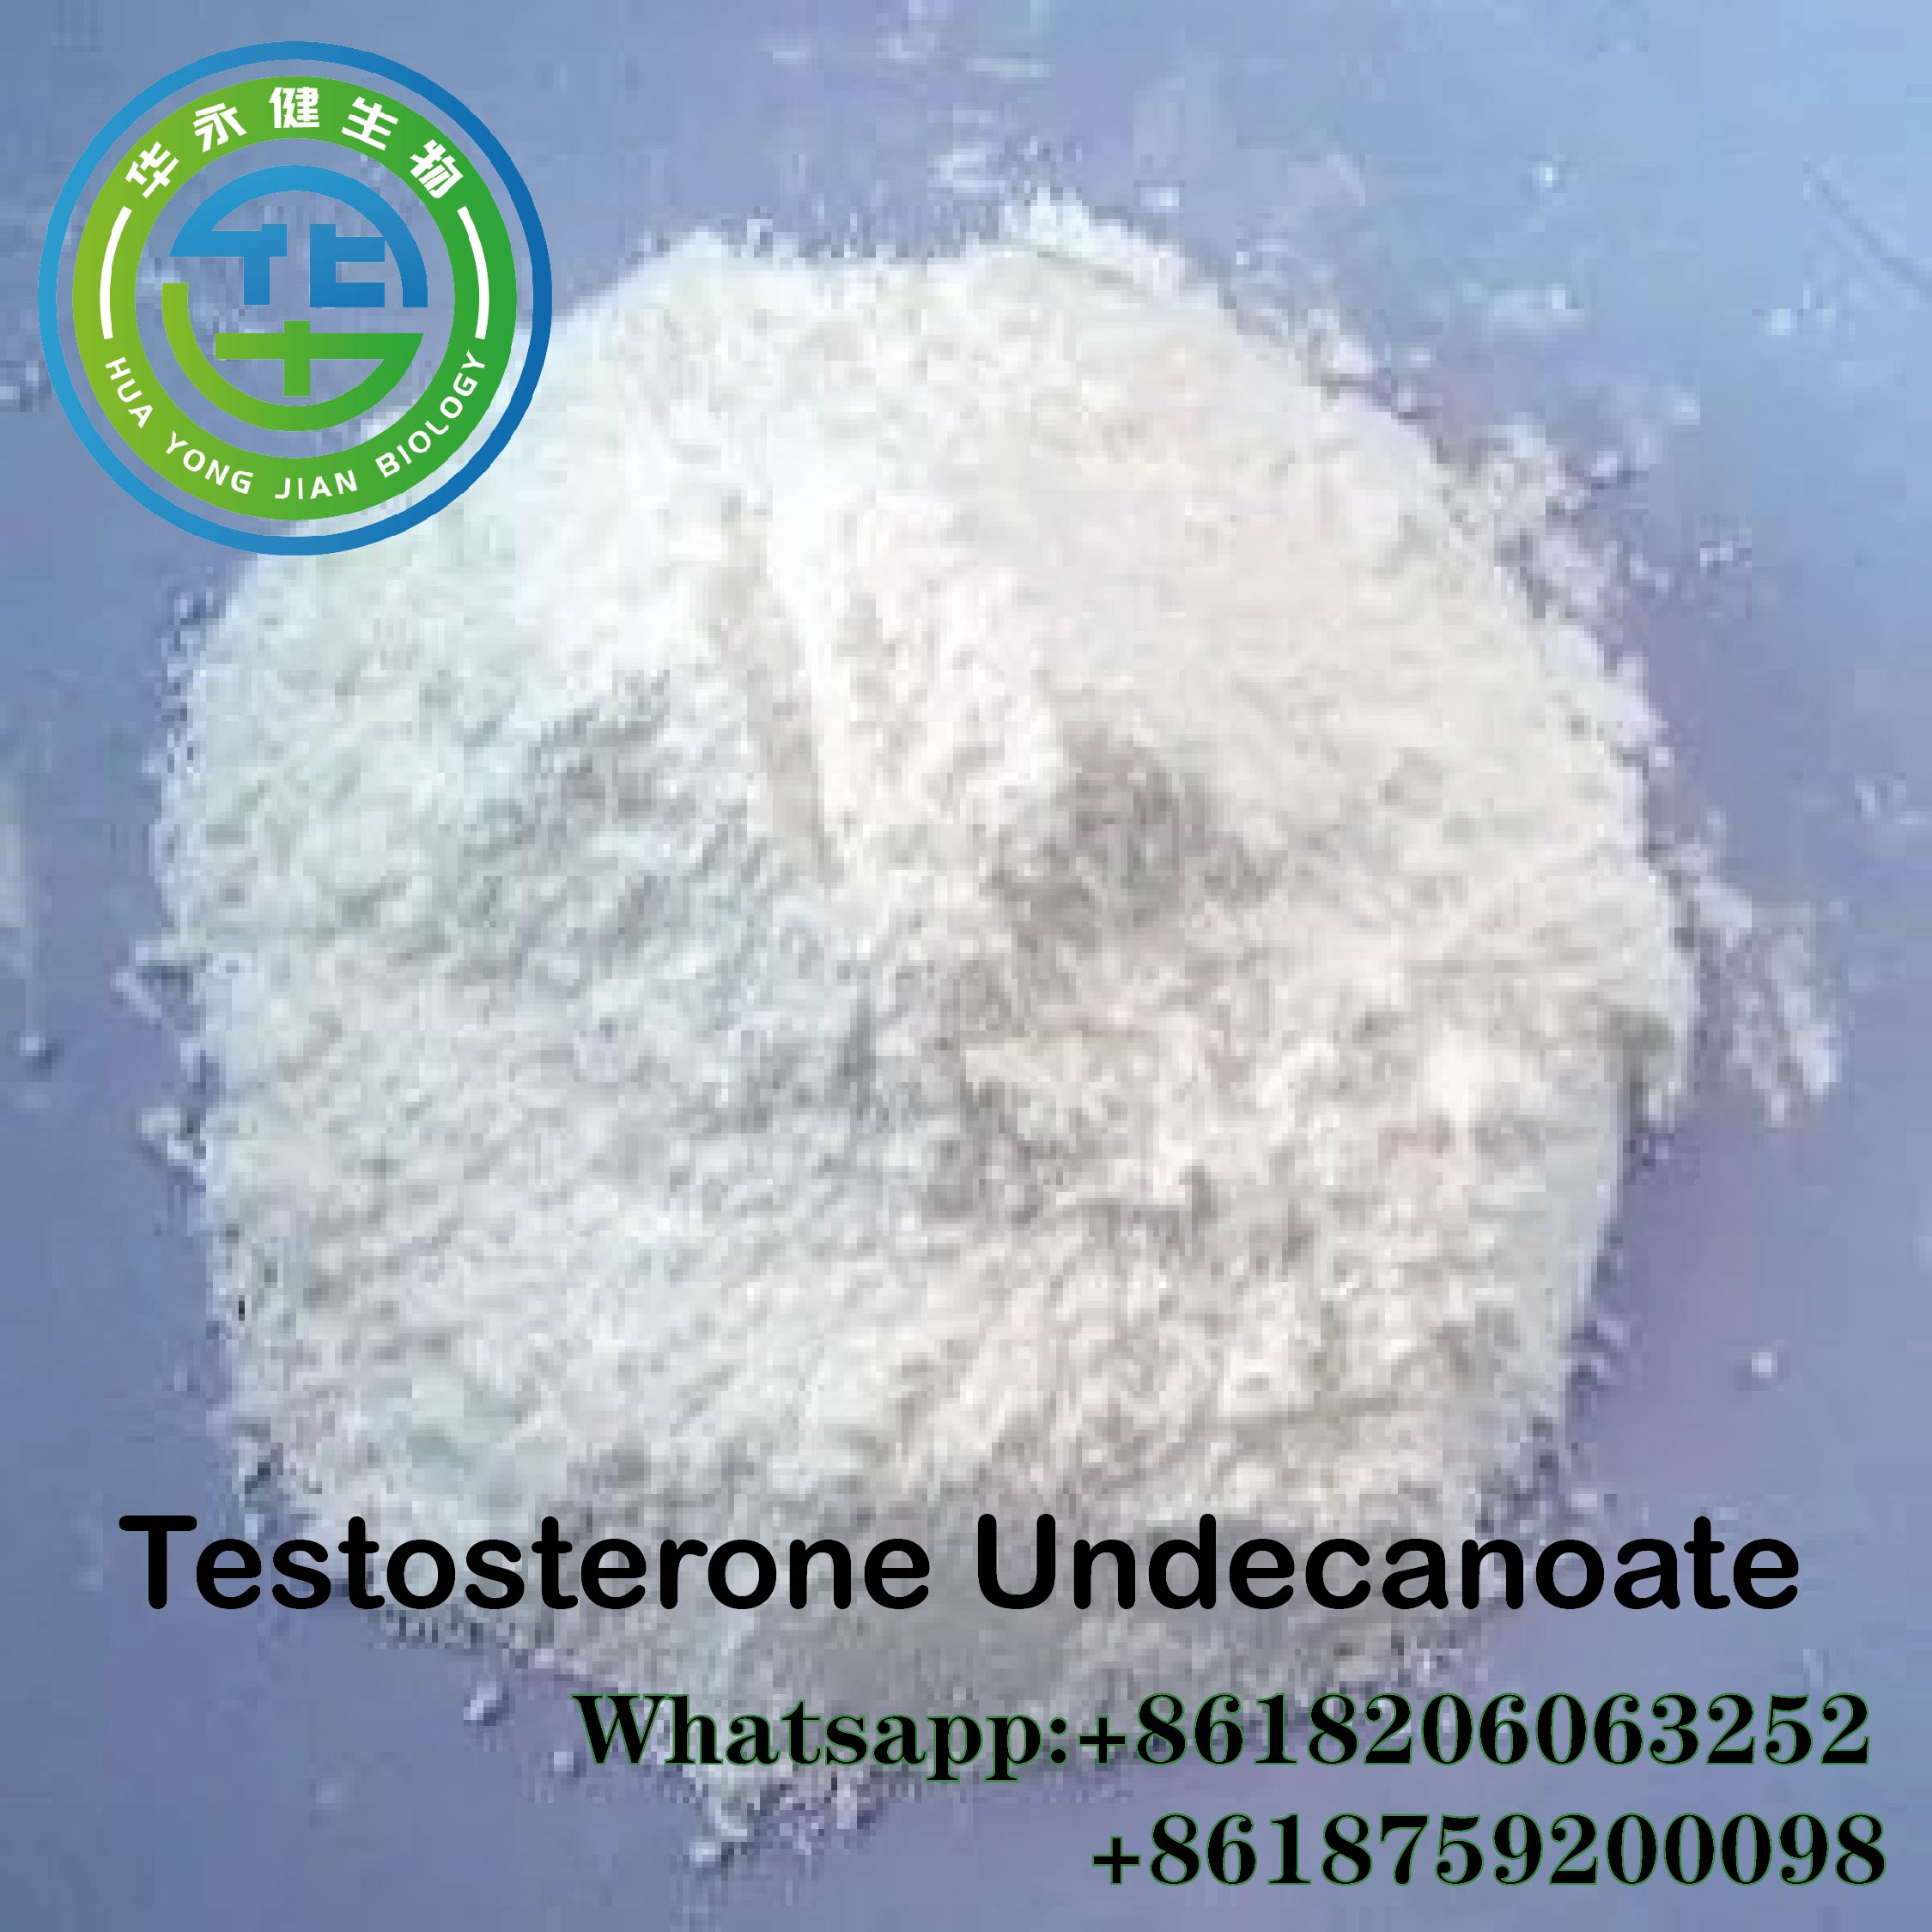 Test U Bodybuilding Anabolic Steroids Injectable for Testosterone undecanoate injectable testosterone CasNO.5949-44-0